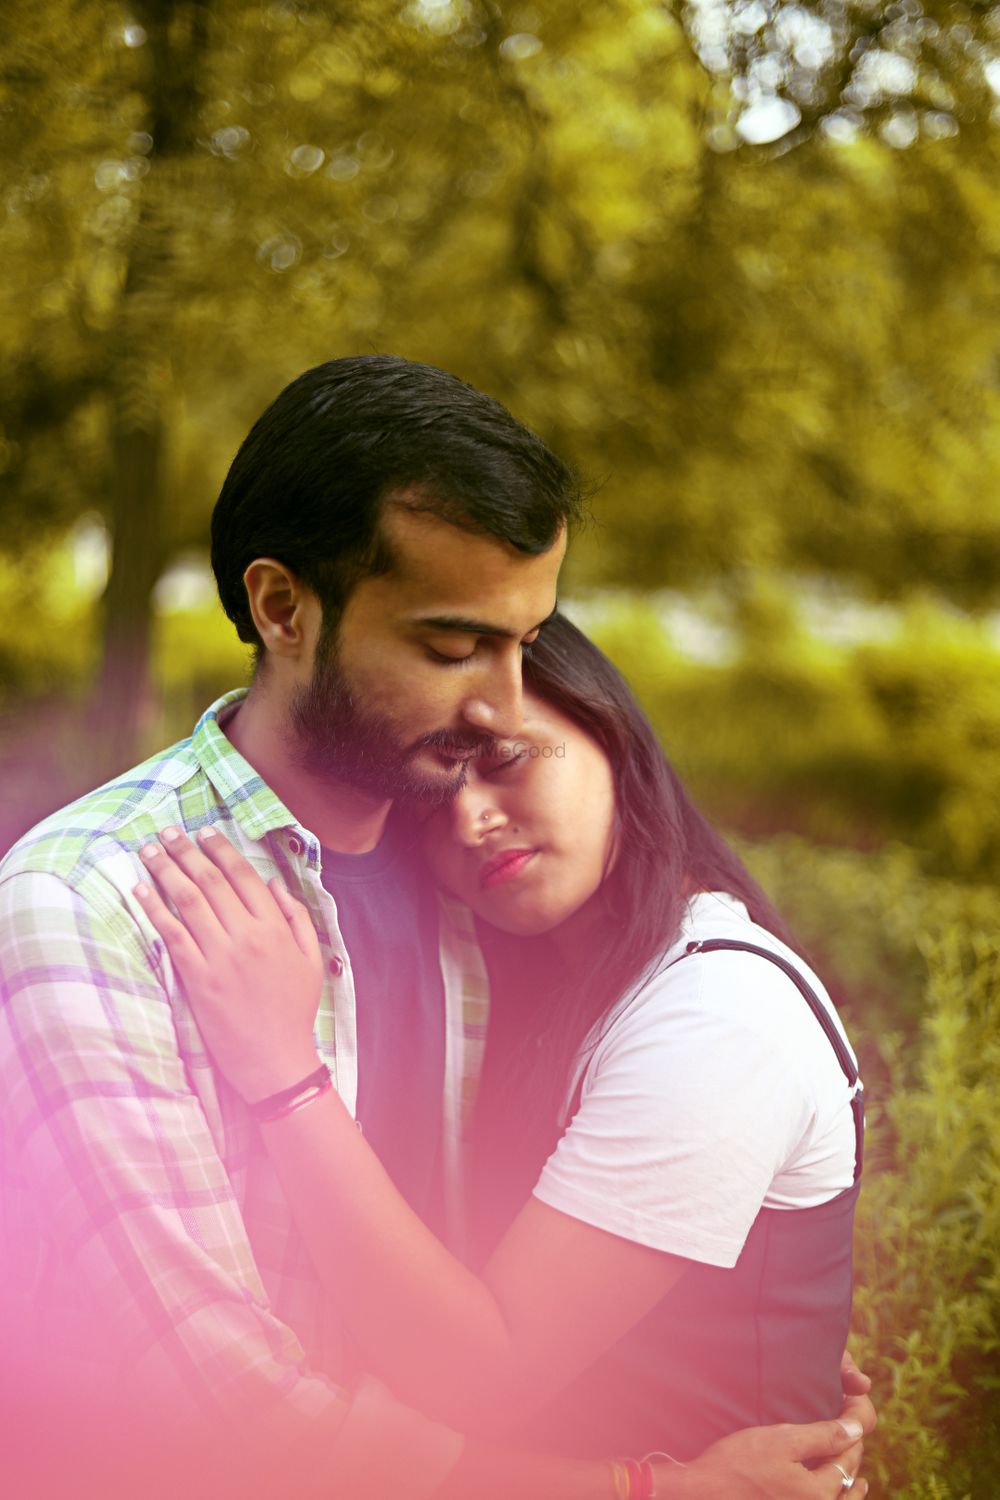 Photo From Pre Wedding Photoshoot - By Shivam Mutha Photography